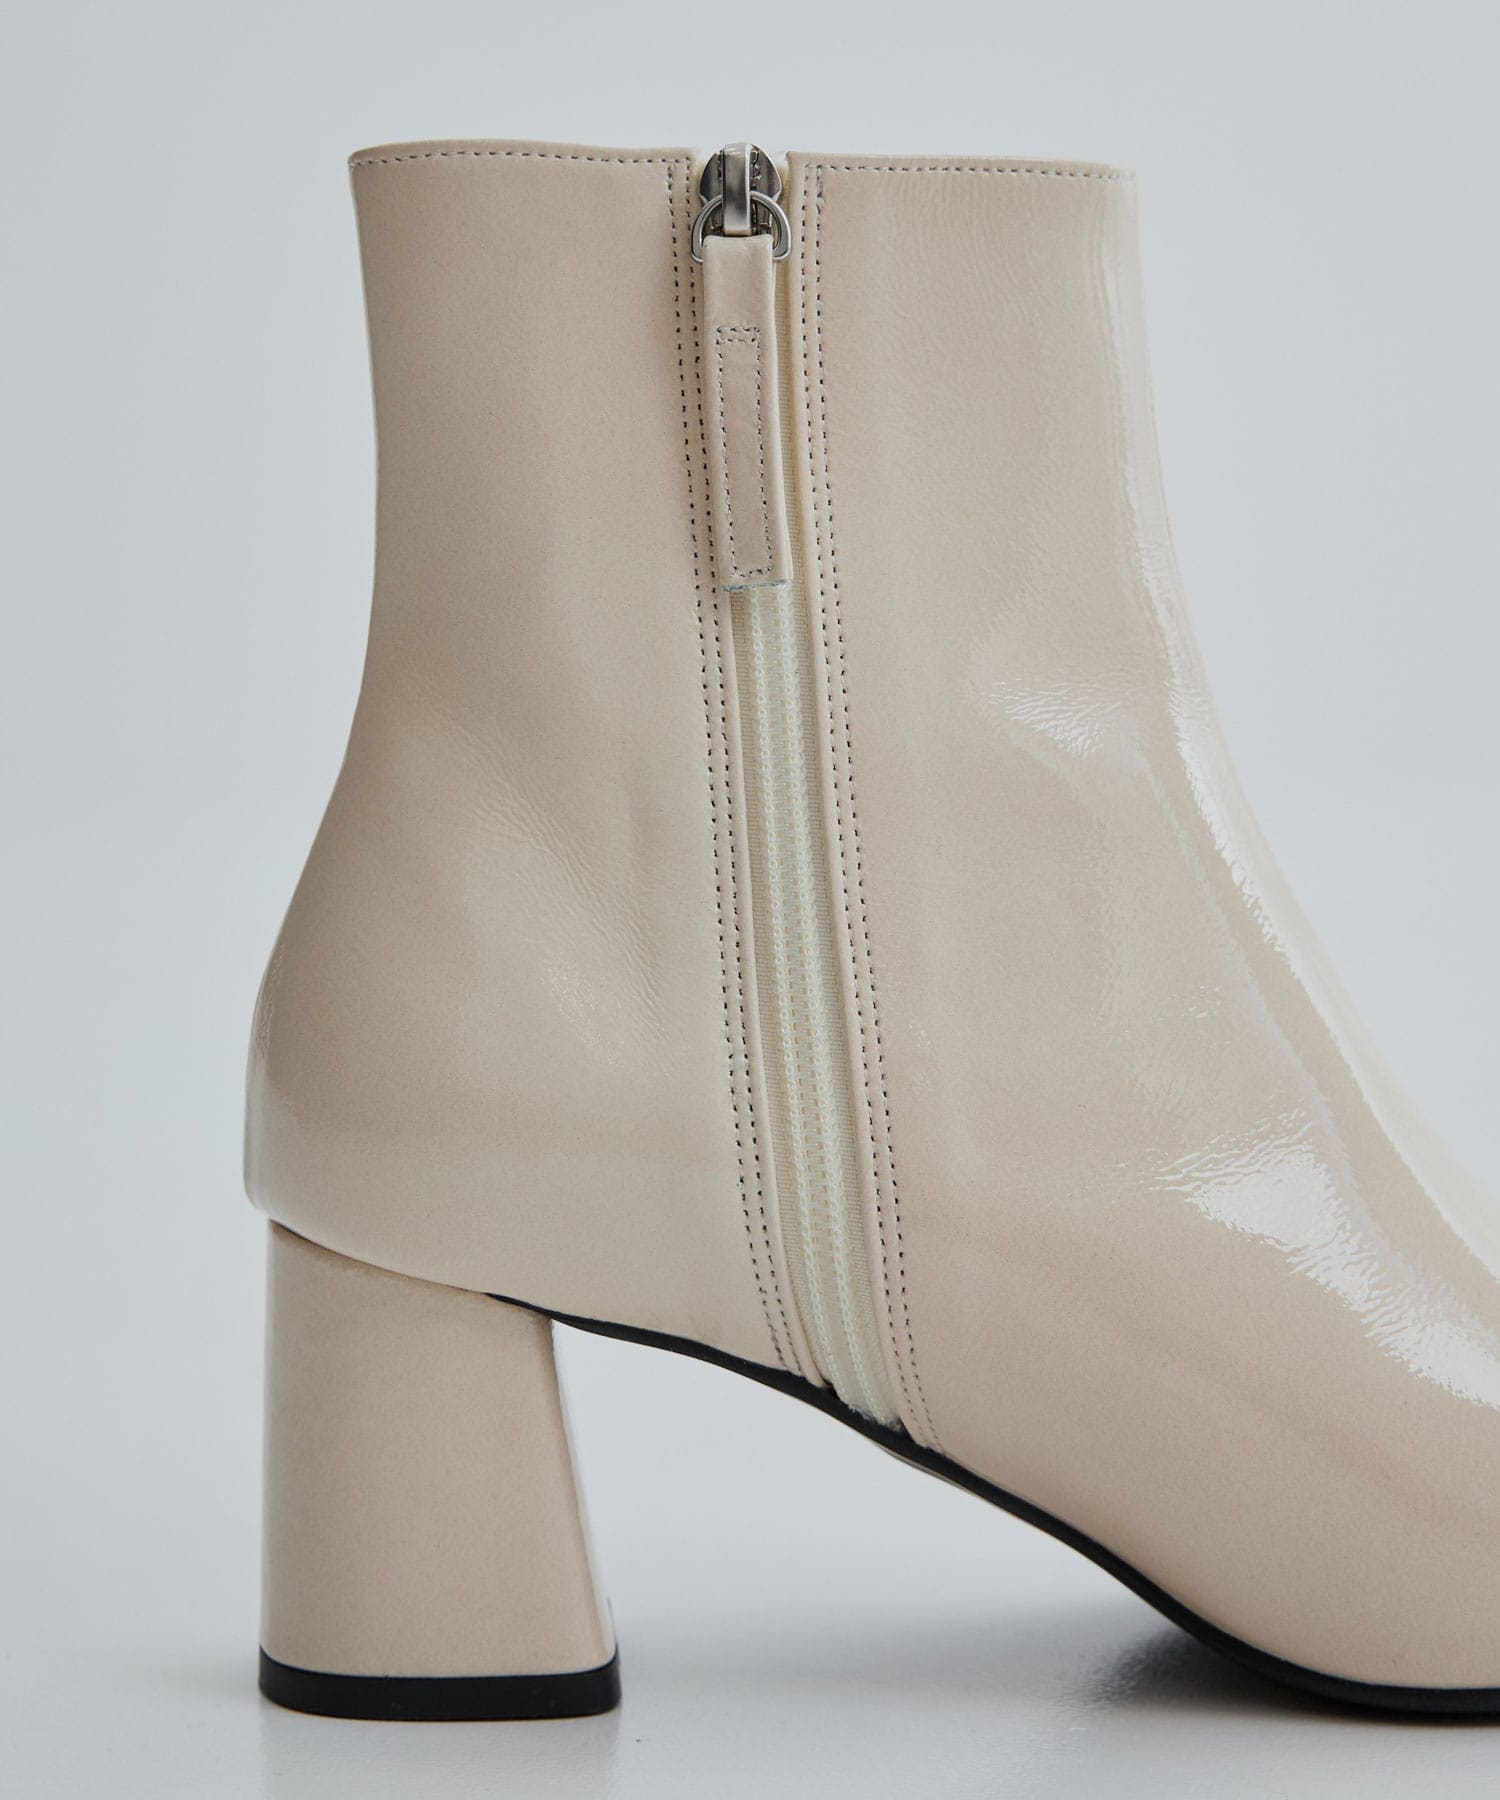 Patent leather square toe boots THE PERMANENT EYE